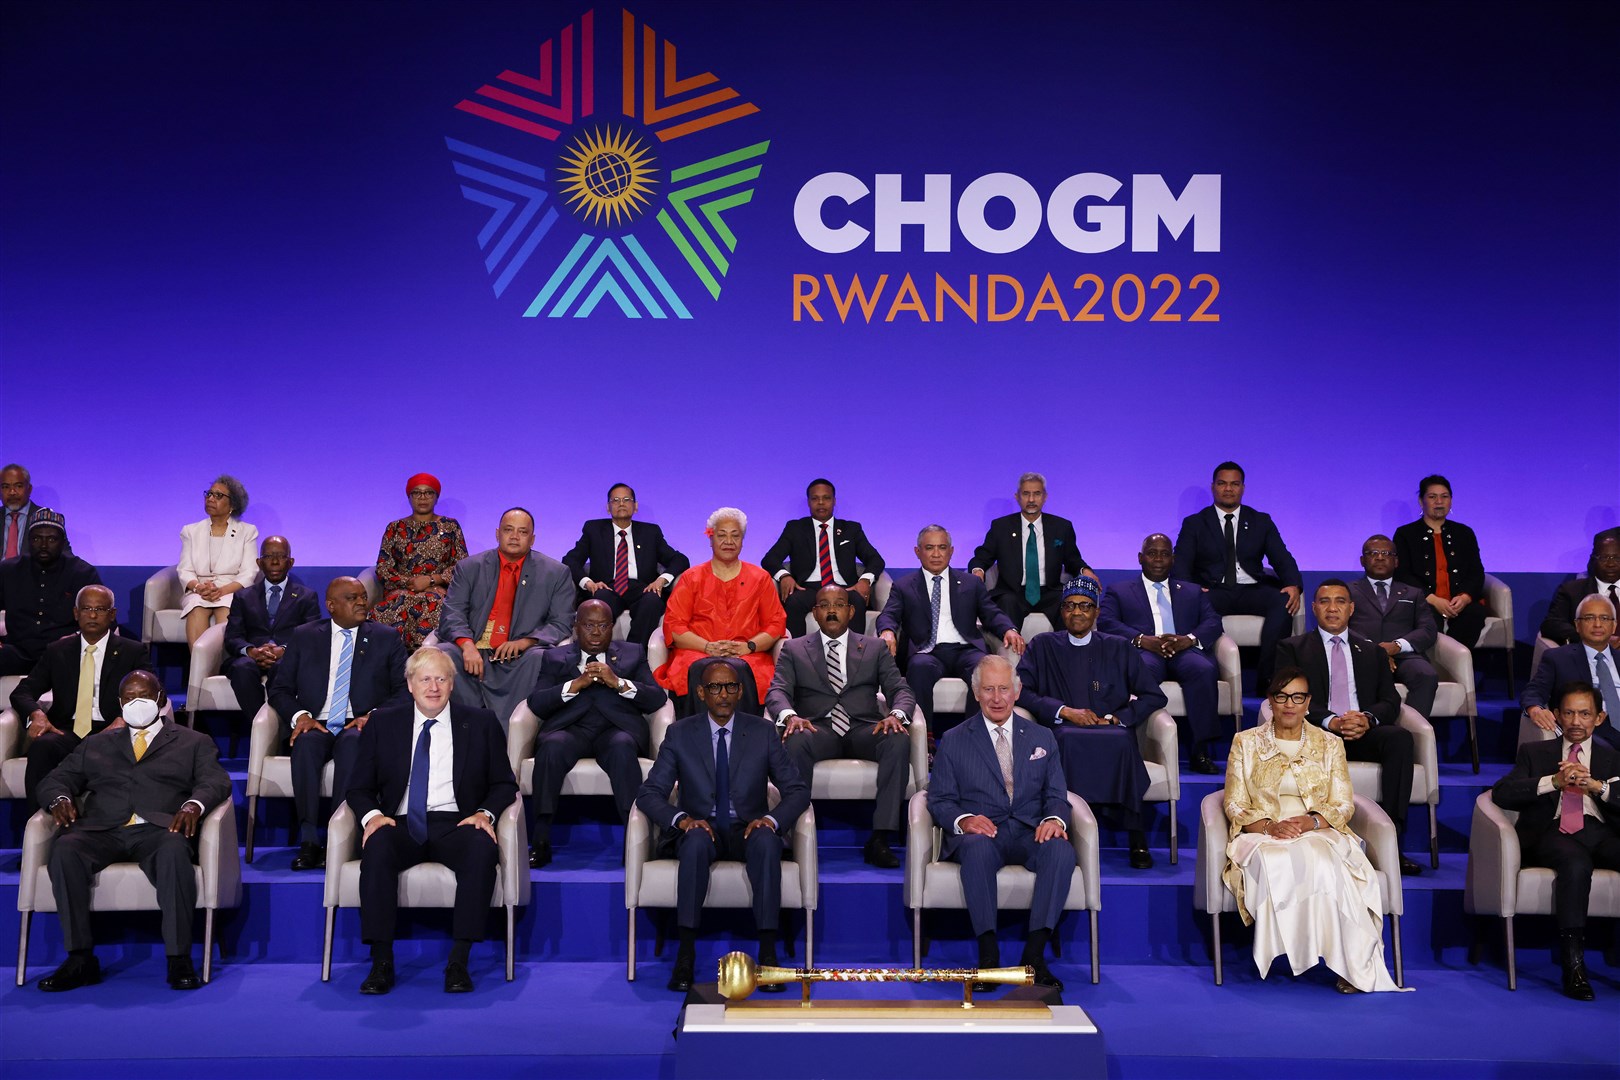 Charles as the Prince of Wales at the opening ceremony of the Commonwealth Heads of Government Meeting (CHOGM) in Rwanda in 2022 (Dan Kitwood/PA)